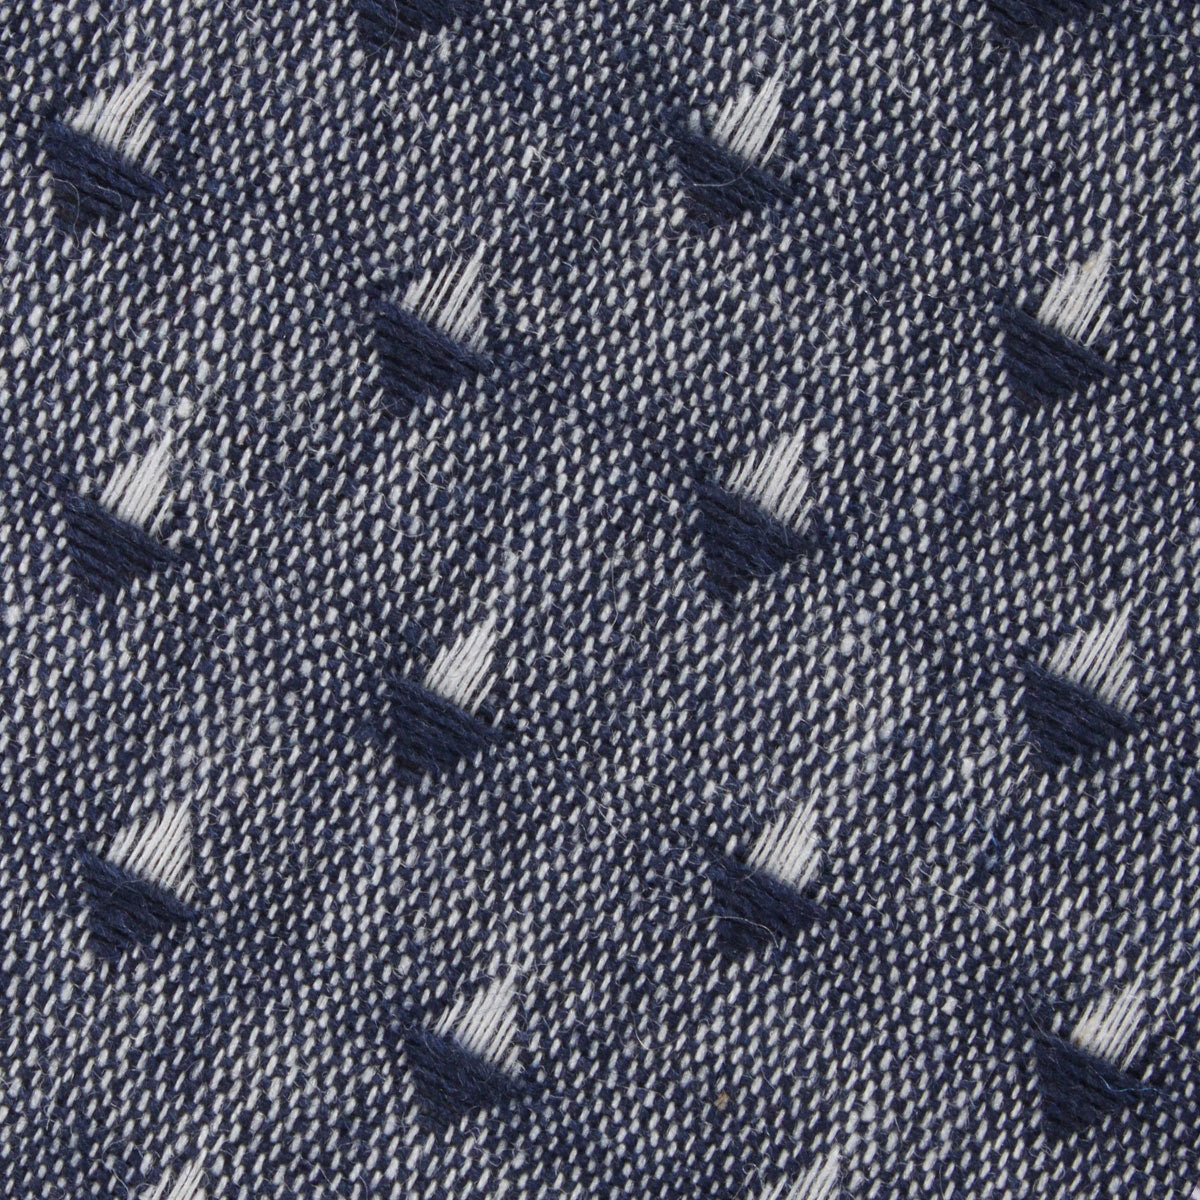 Inception Navy Linen Fabric Pocket Square